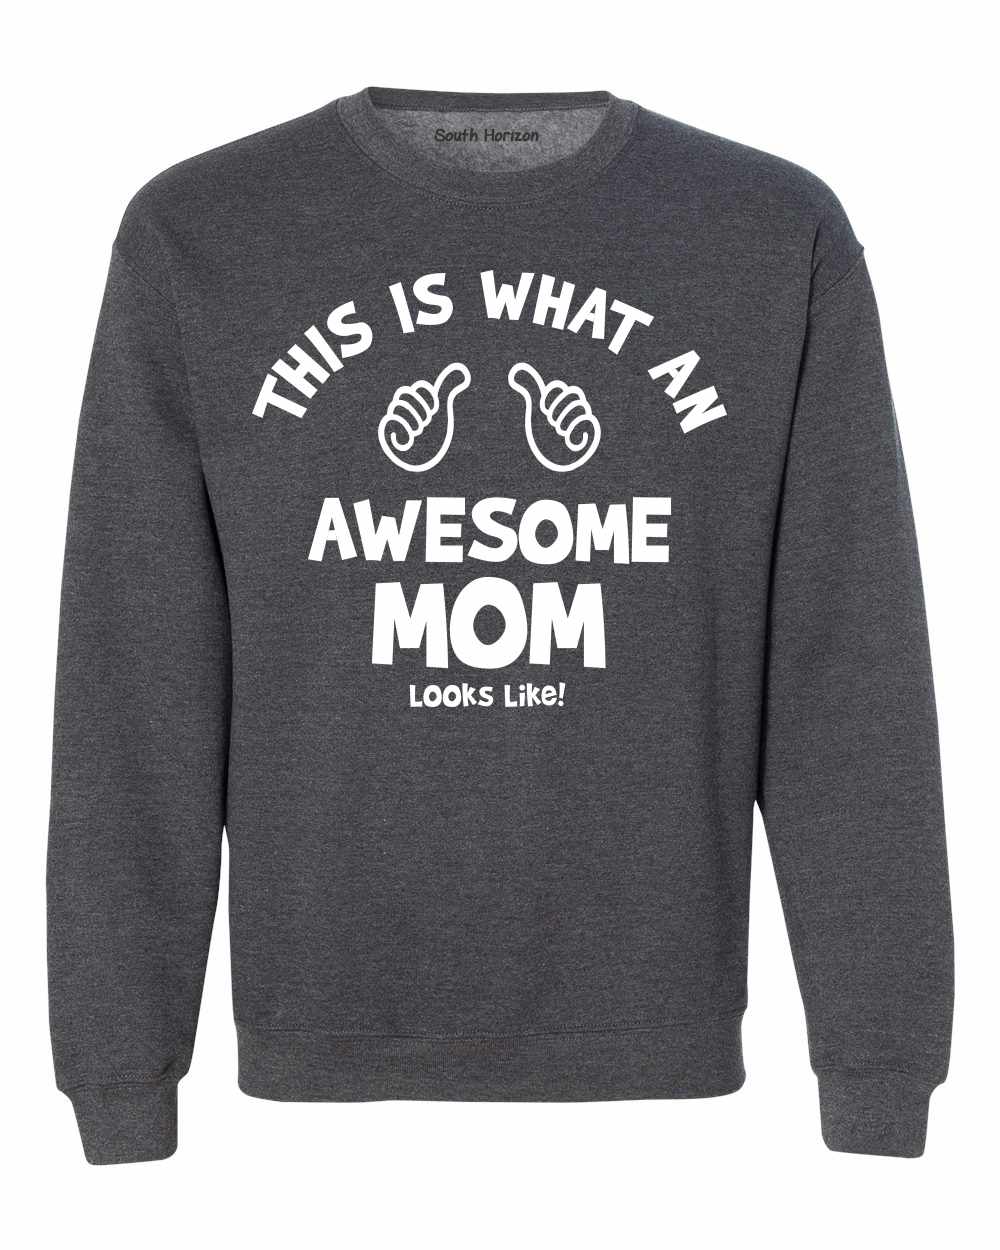 This Is What An Awesome MOM Looks Like on SweatShirt